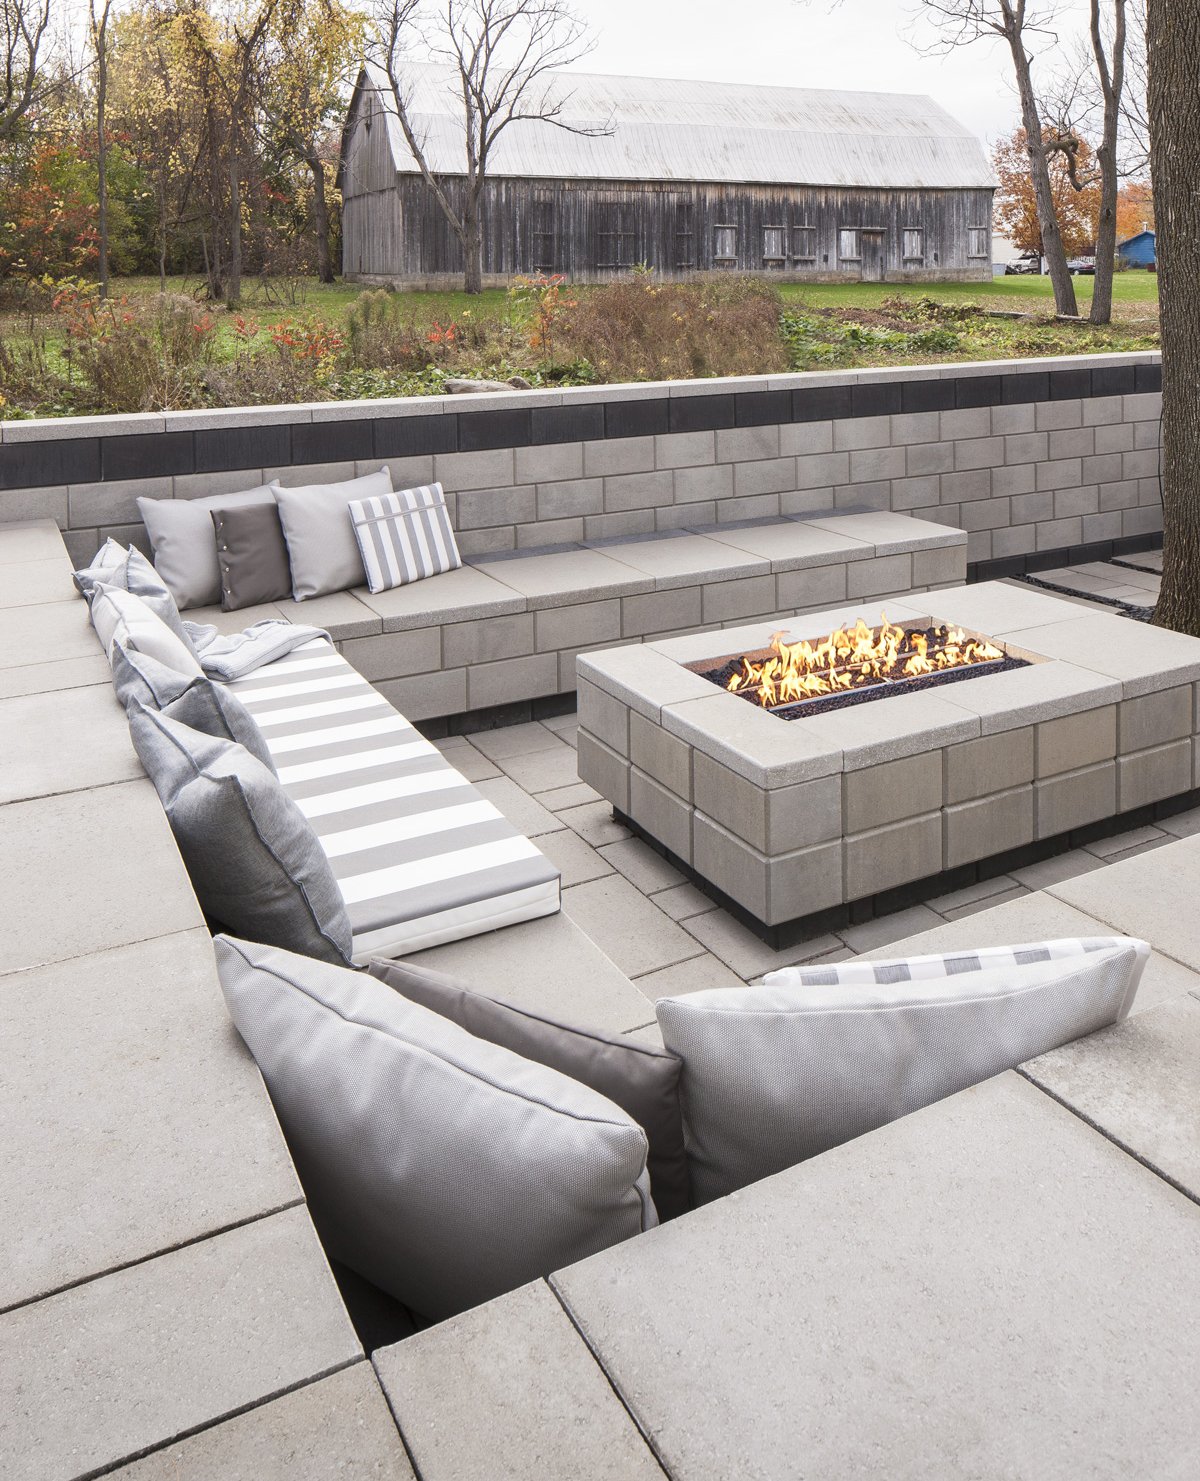 11 Amazing Stone Fire Pit Ideas For, How Big To Make Fire Pit Patio With Pavers